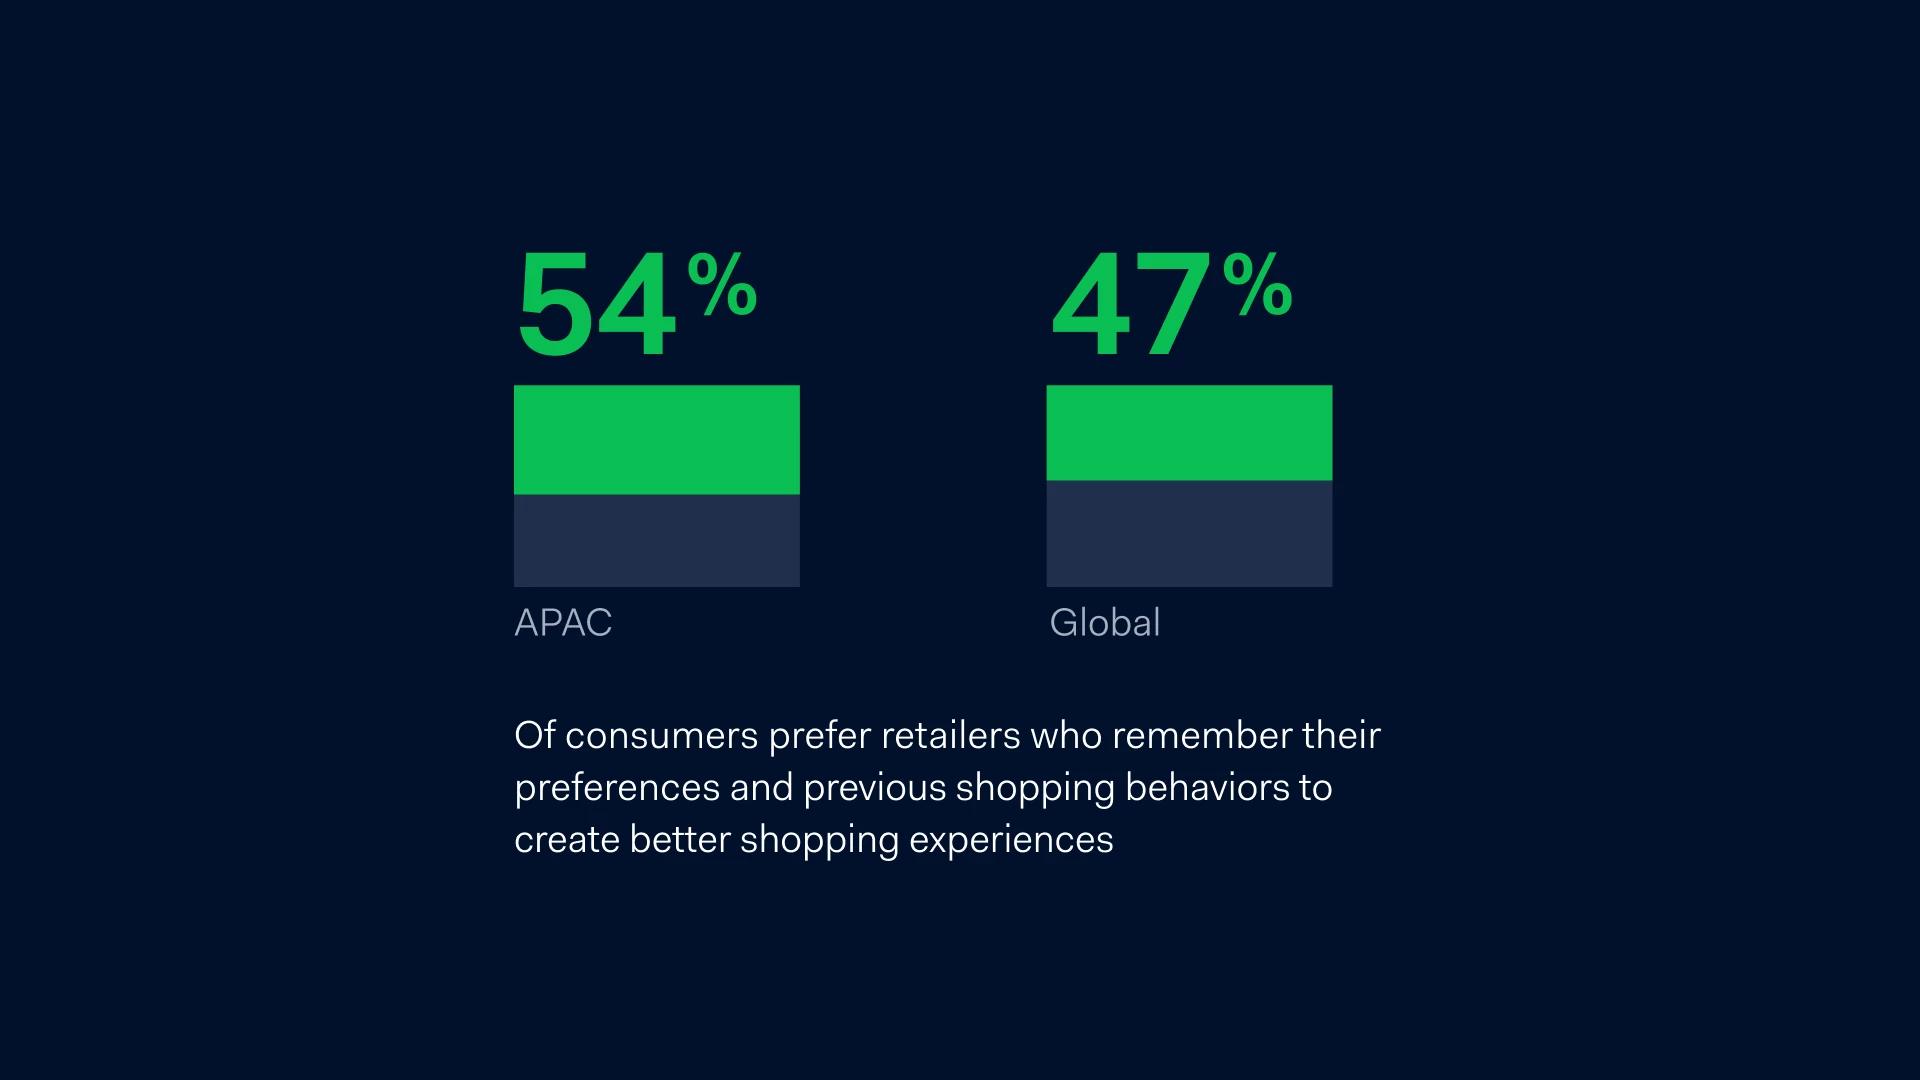 Consumers prefer retailers who remember their preferences and previous shopping behaviors to create better shopping experiences